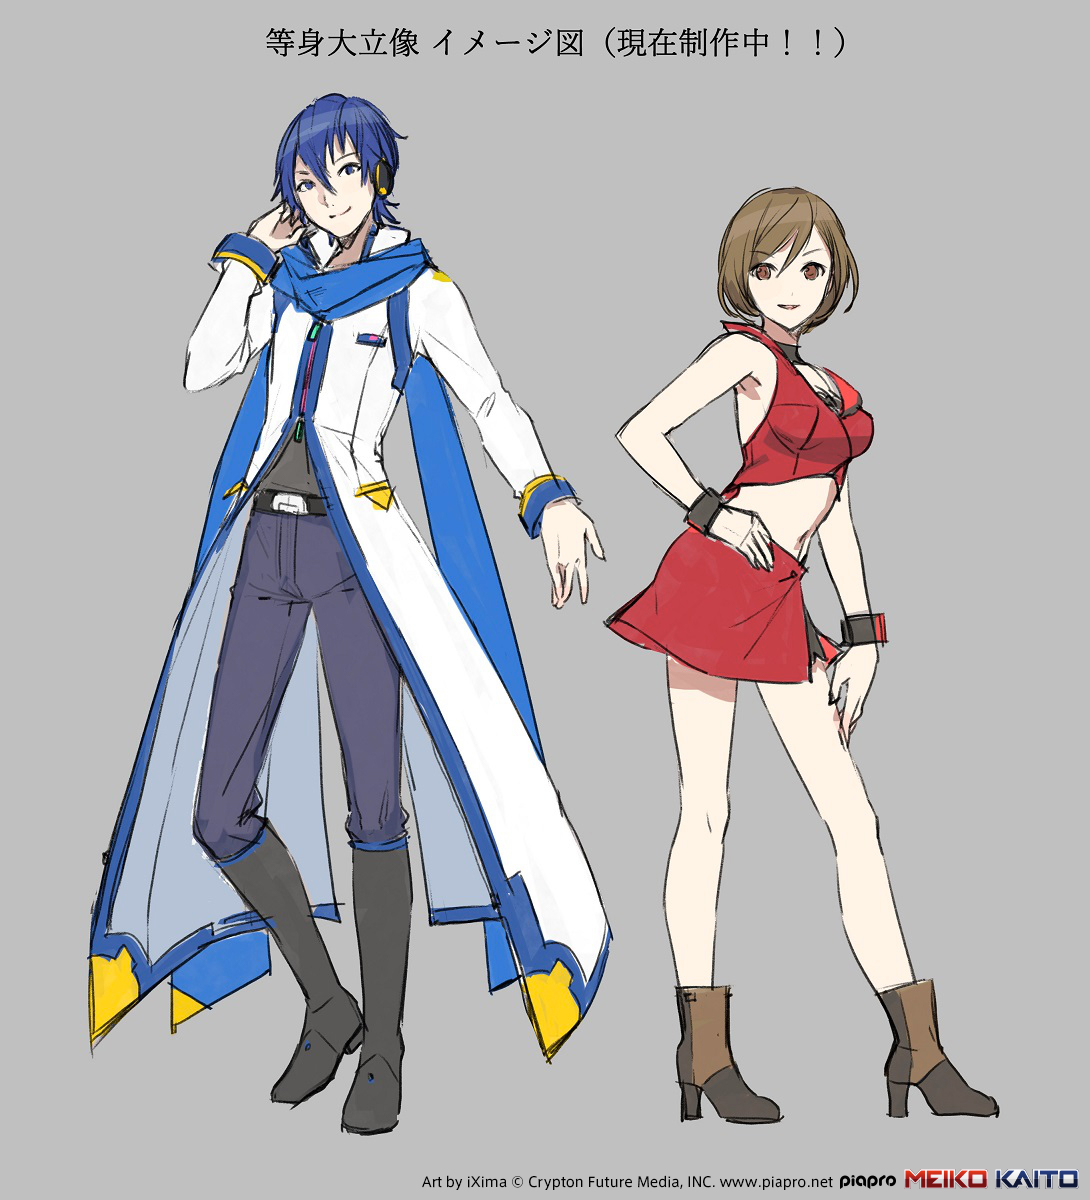 Meiko and Kaito Life Size Statue Crowdfunding - VNN